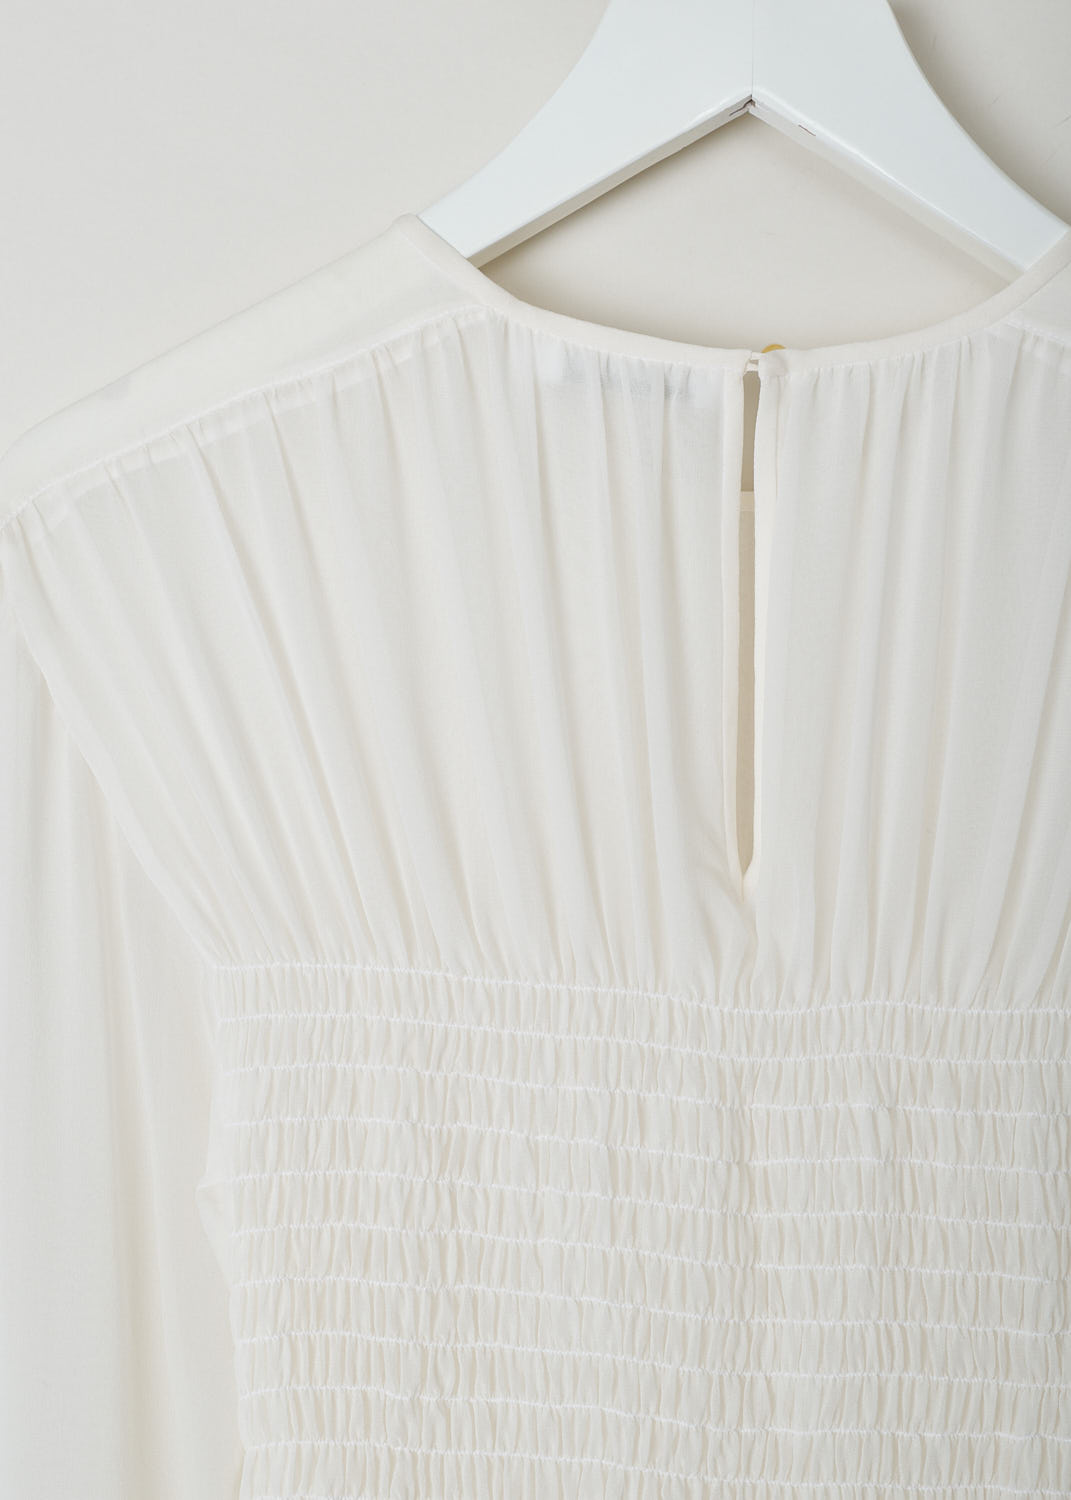 JIL SANDER, WHITE DRESS WITH SHIRRED BODICE, White, Detail 1, This white long sleeve dress has pleats across the chest and a shirred bodice. The dress is made in a semi sheer fabric.  The skirt flows out from small crystal pleats. The hemline has an asymmetric finish, meaning that from left to right one side is longer than the other. A single button can be found in the back of the neck.
